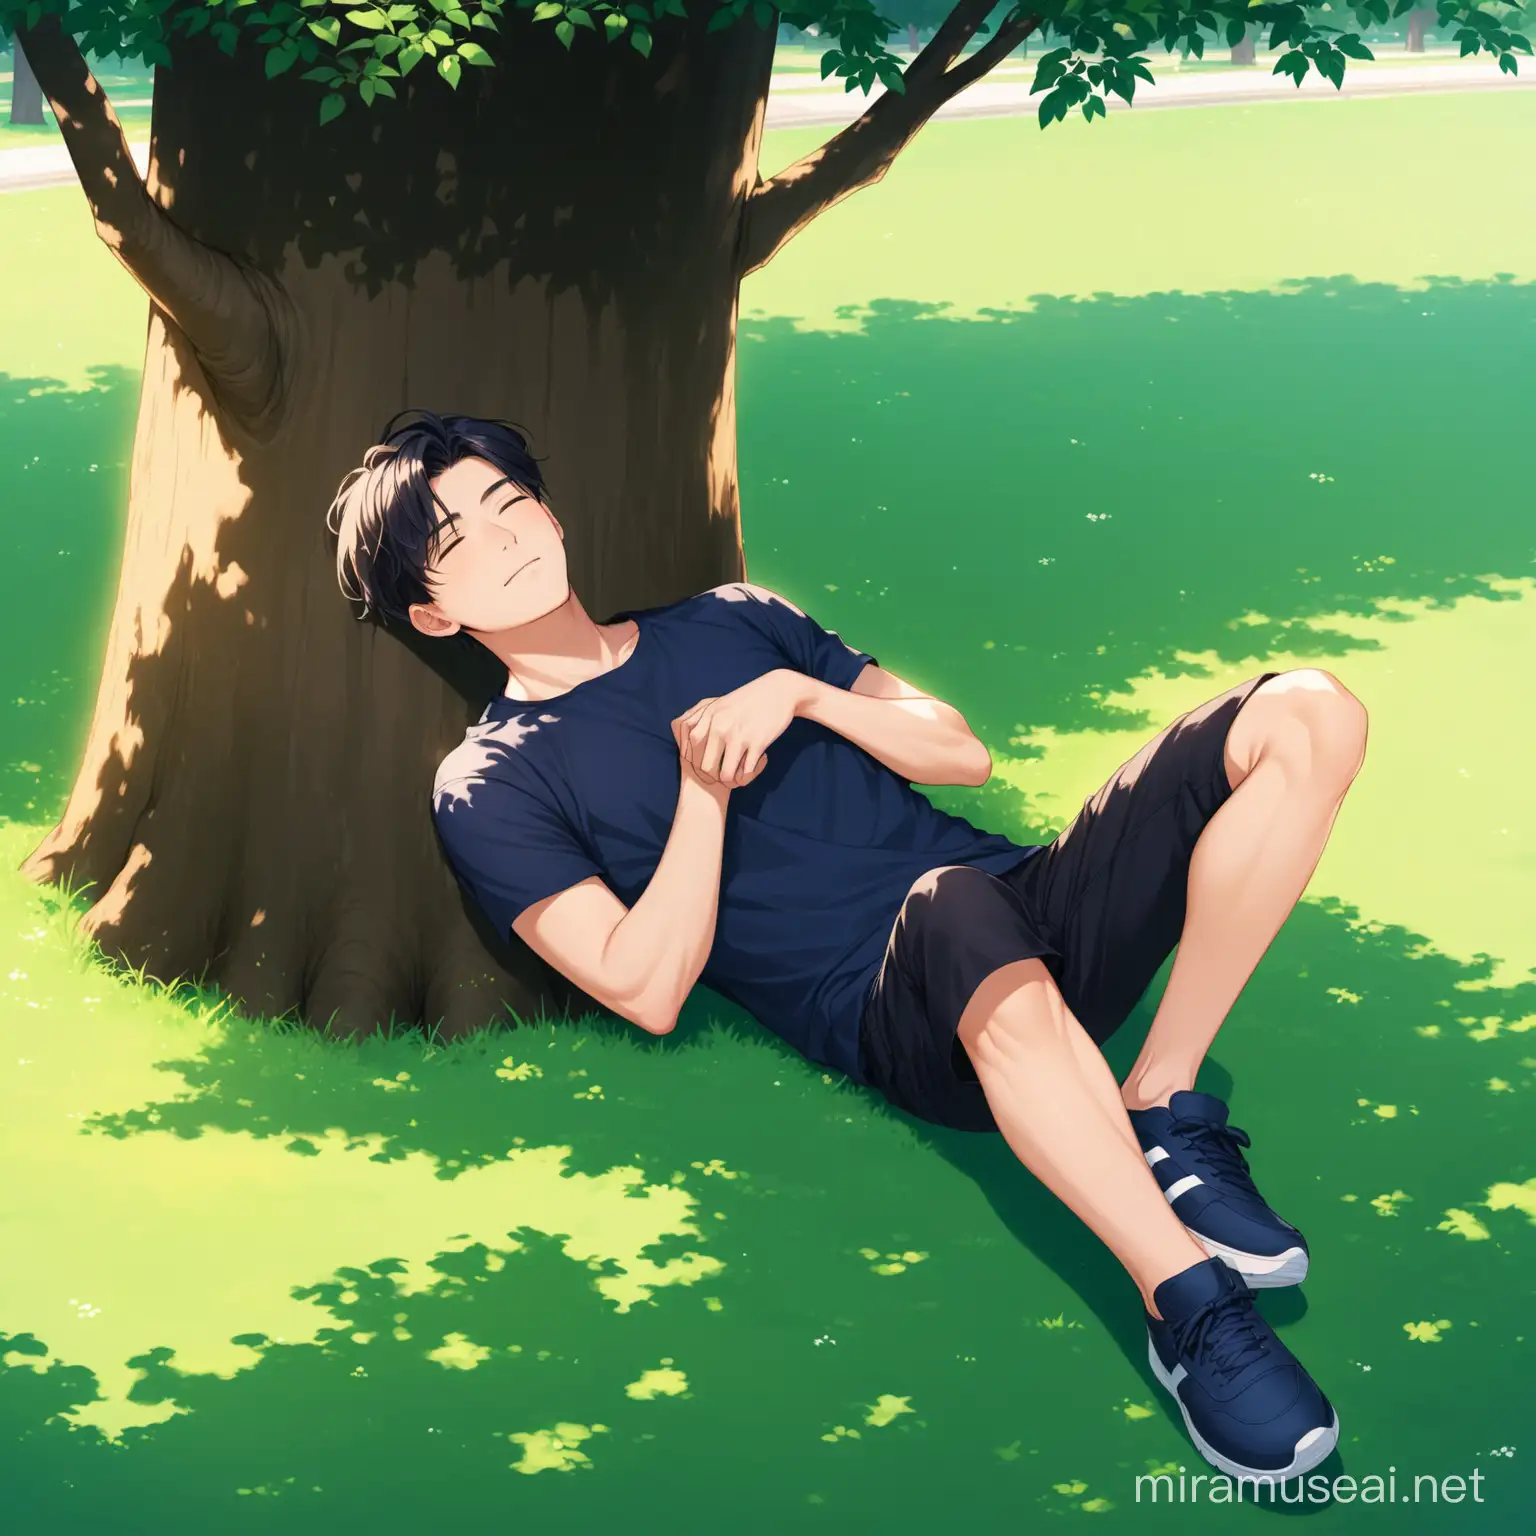 Handsome Young Man Relaxing Under Tree in Peaceful Park Setting